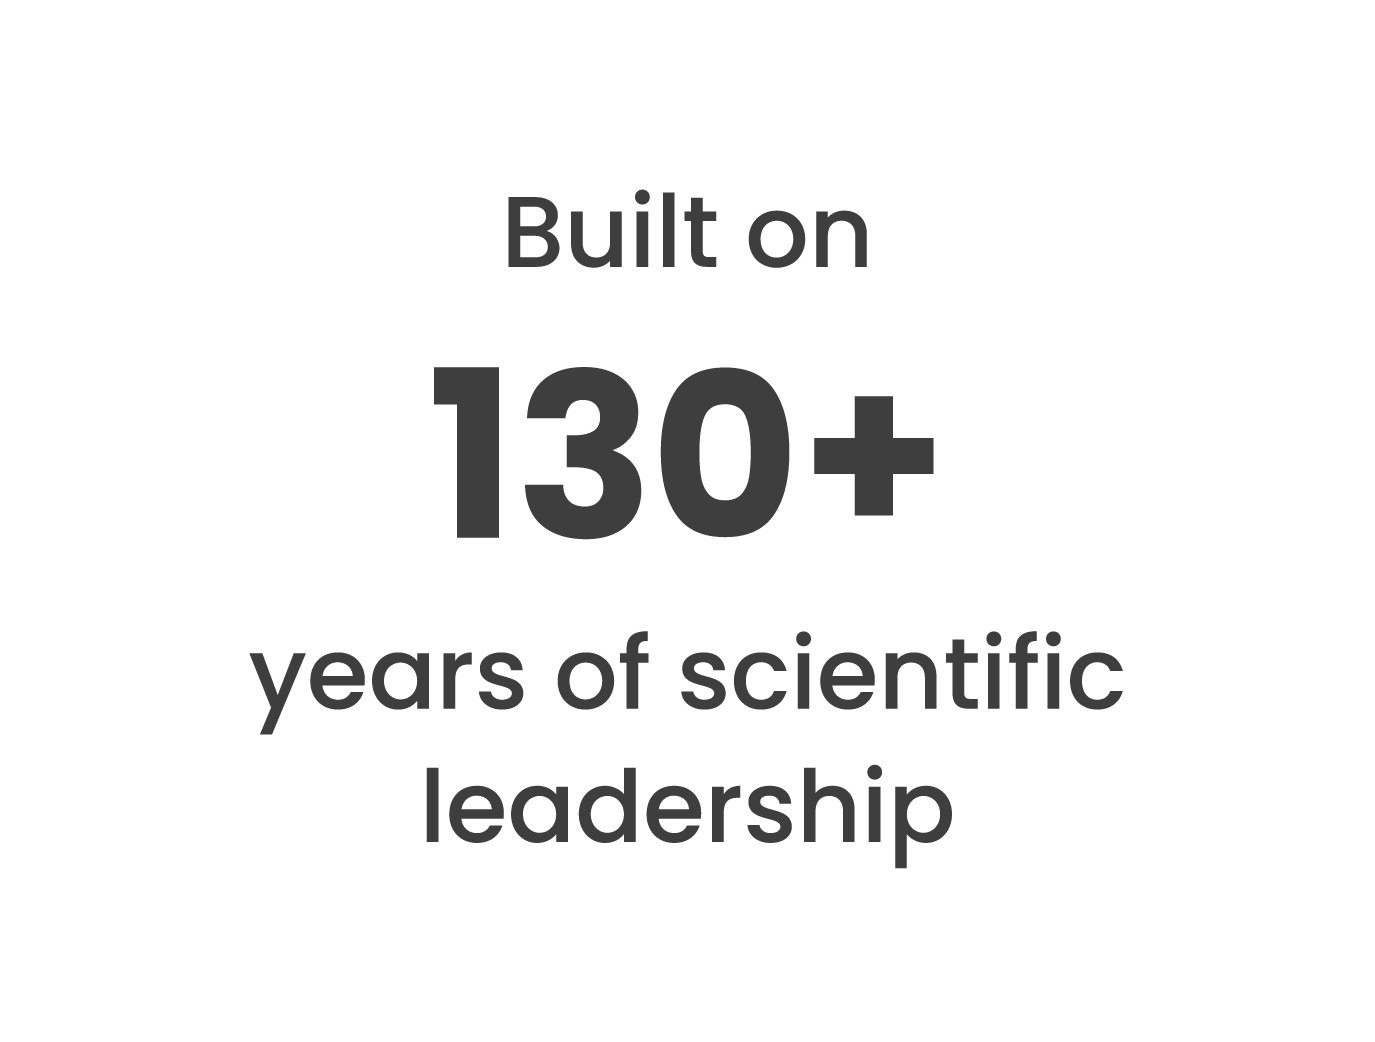 Built on more than 130 years of scientific leadership